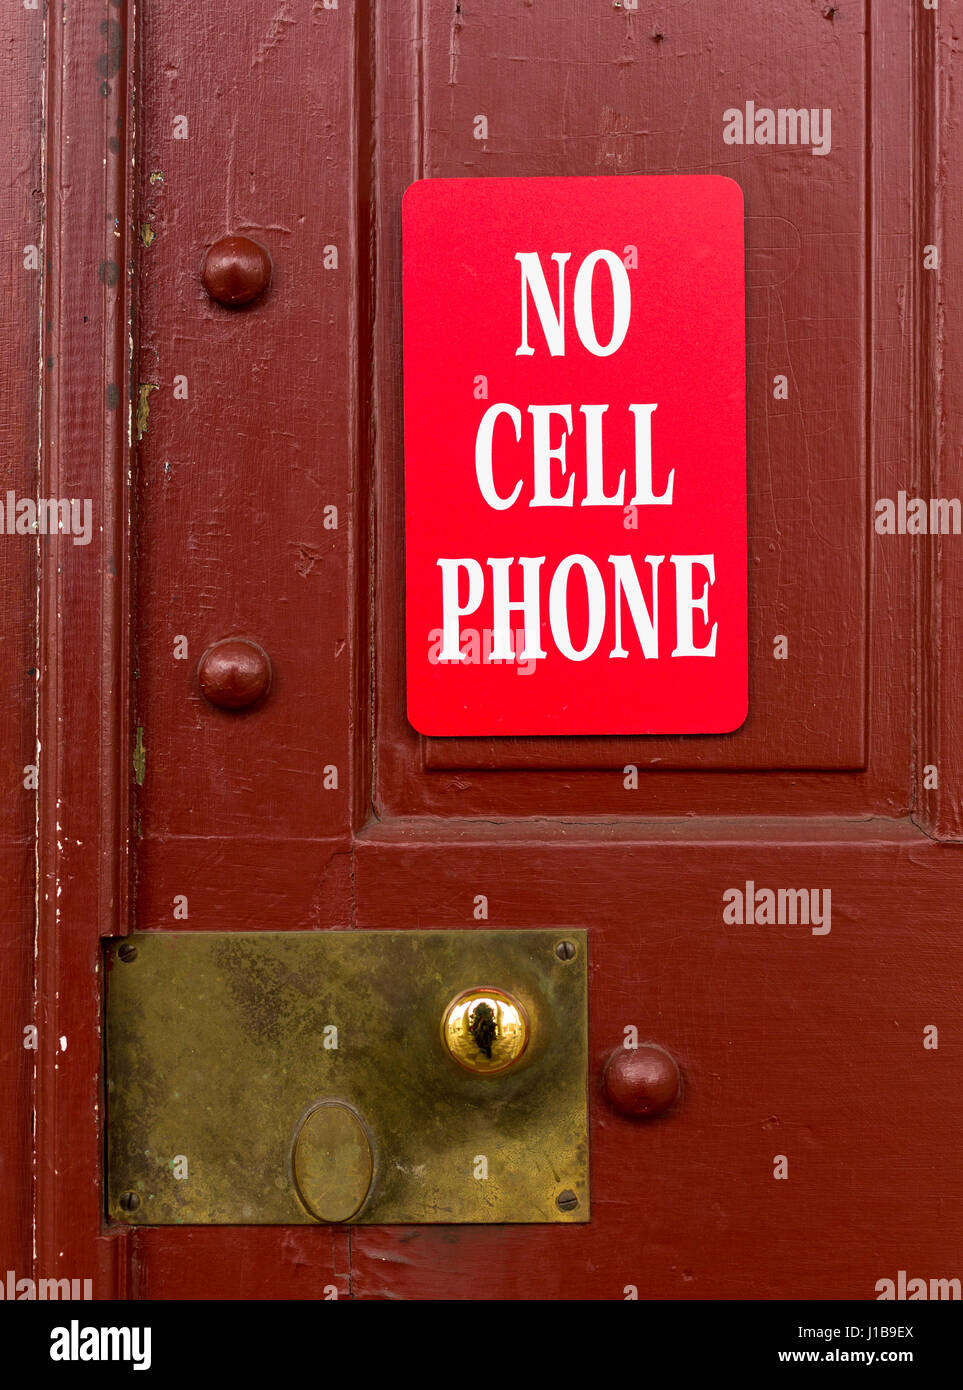 Sign on a door warning that no cell phone, smartphone or wireless phone usage is allowed Stock Photo